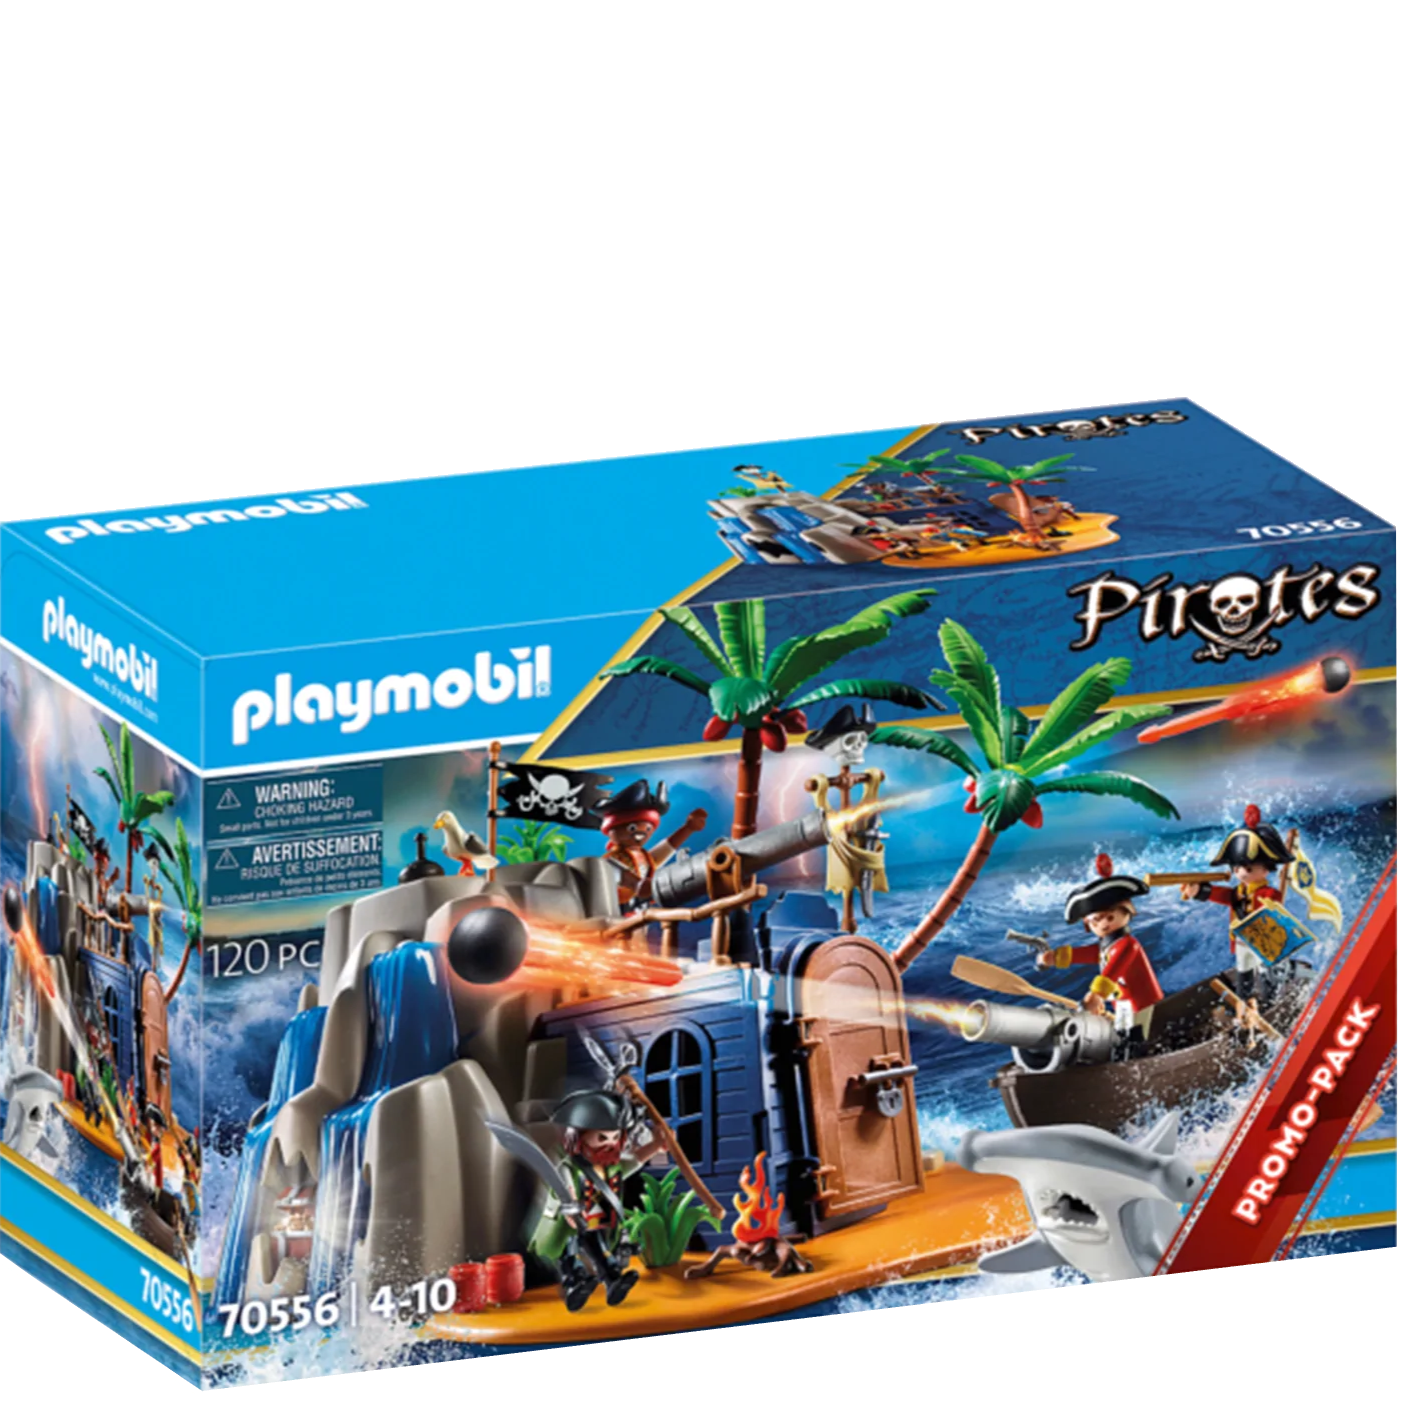 paperback Implementeren Blaast op Playmobil Pirate Island Hideout – The Great Rocky Mountain Toy Company